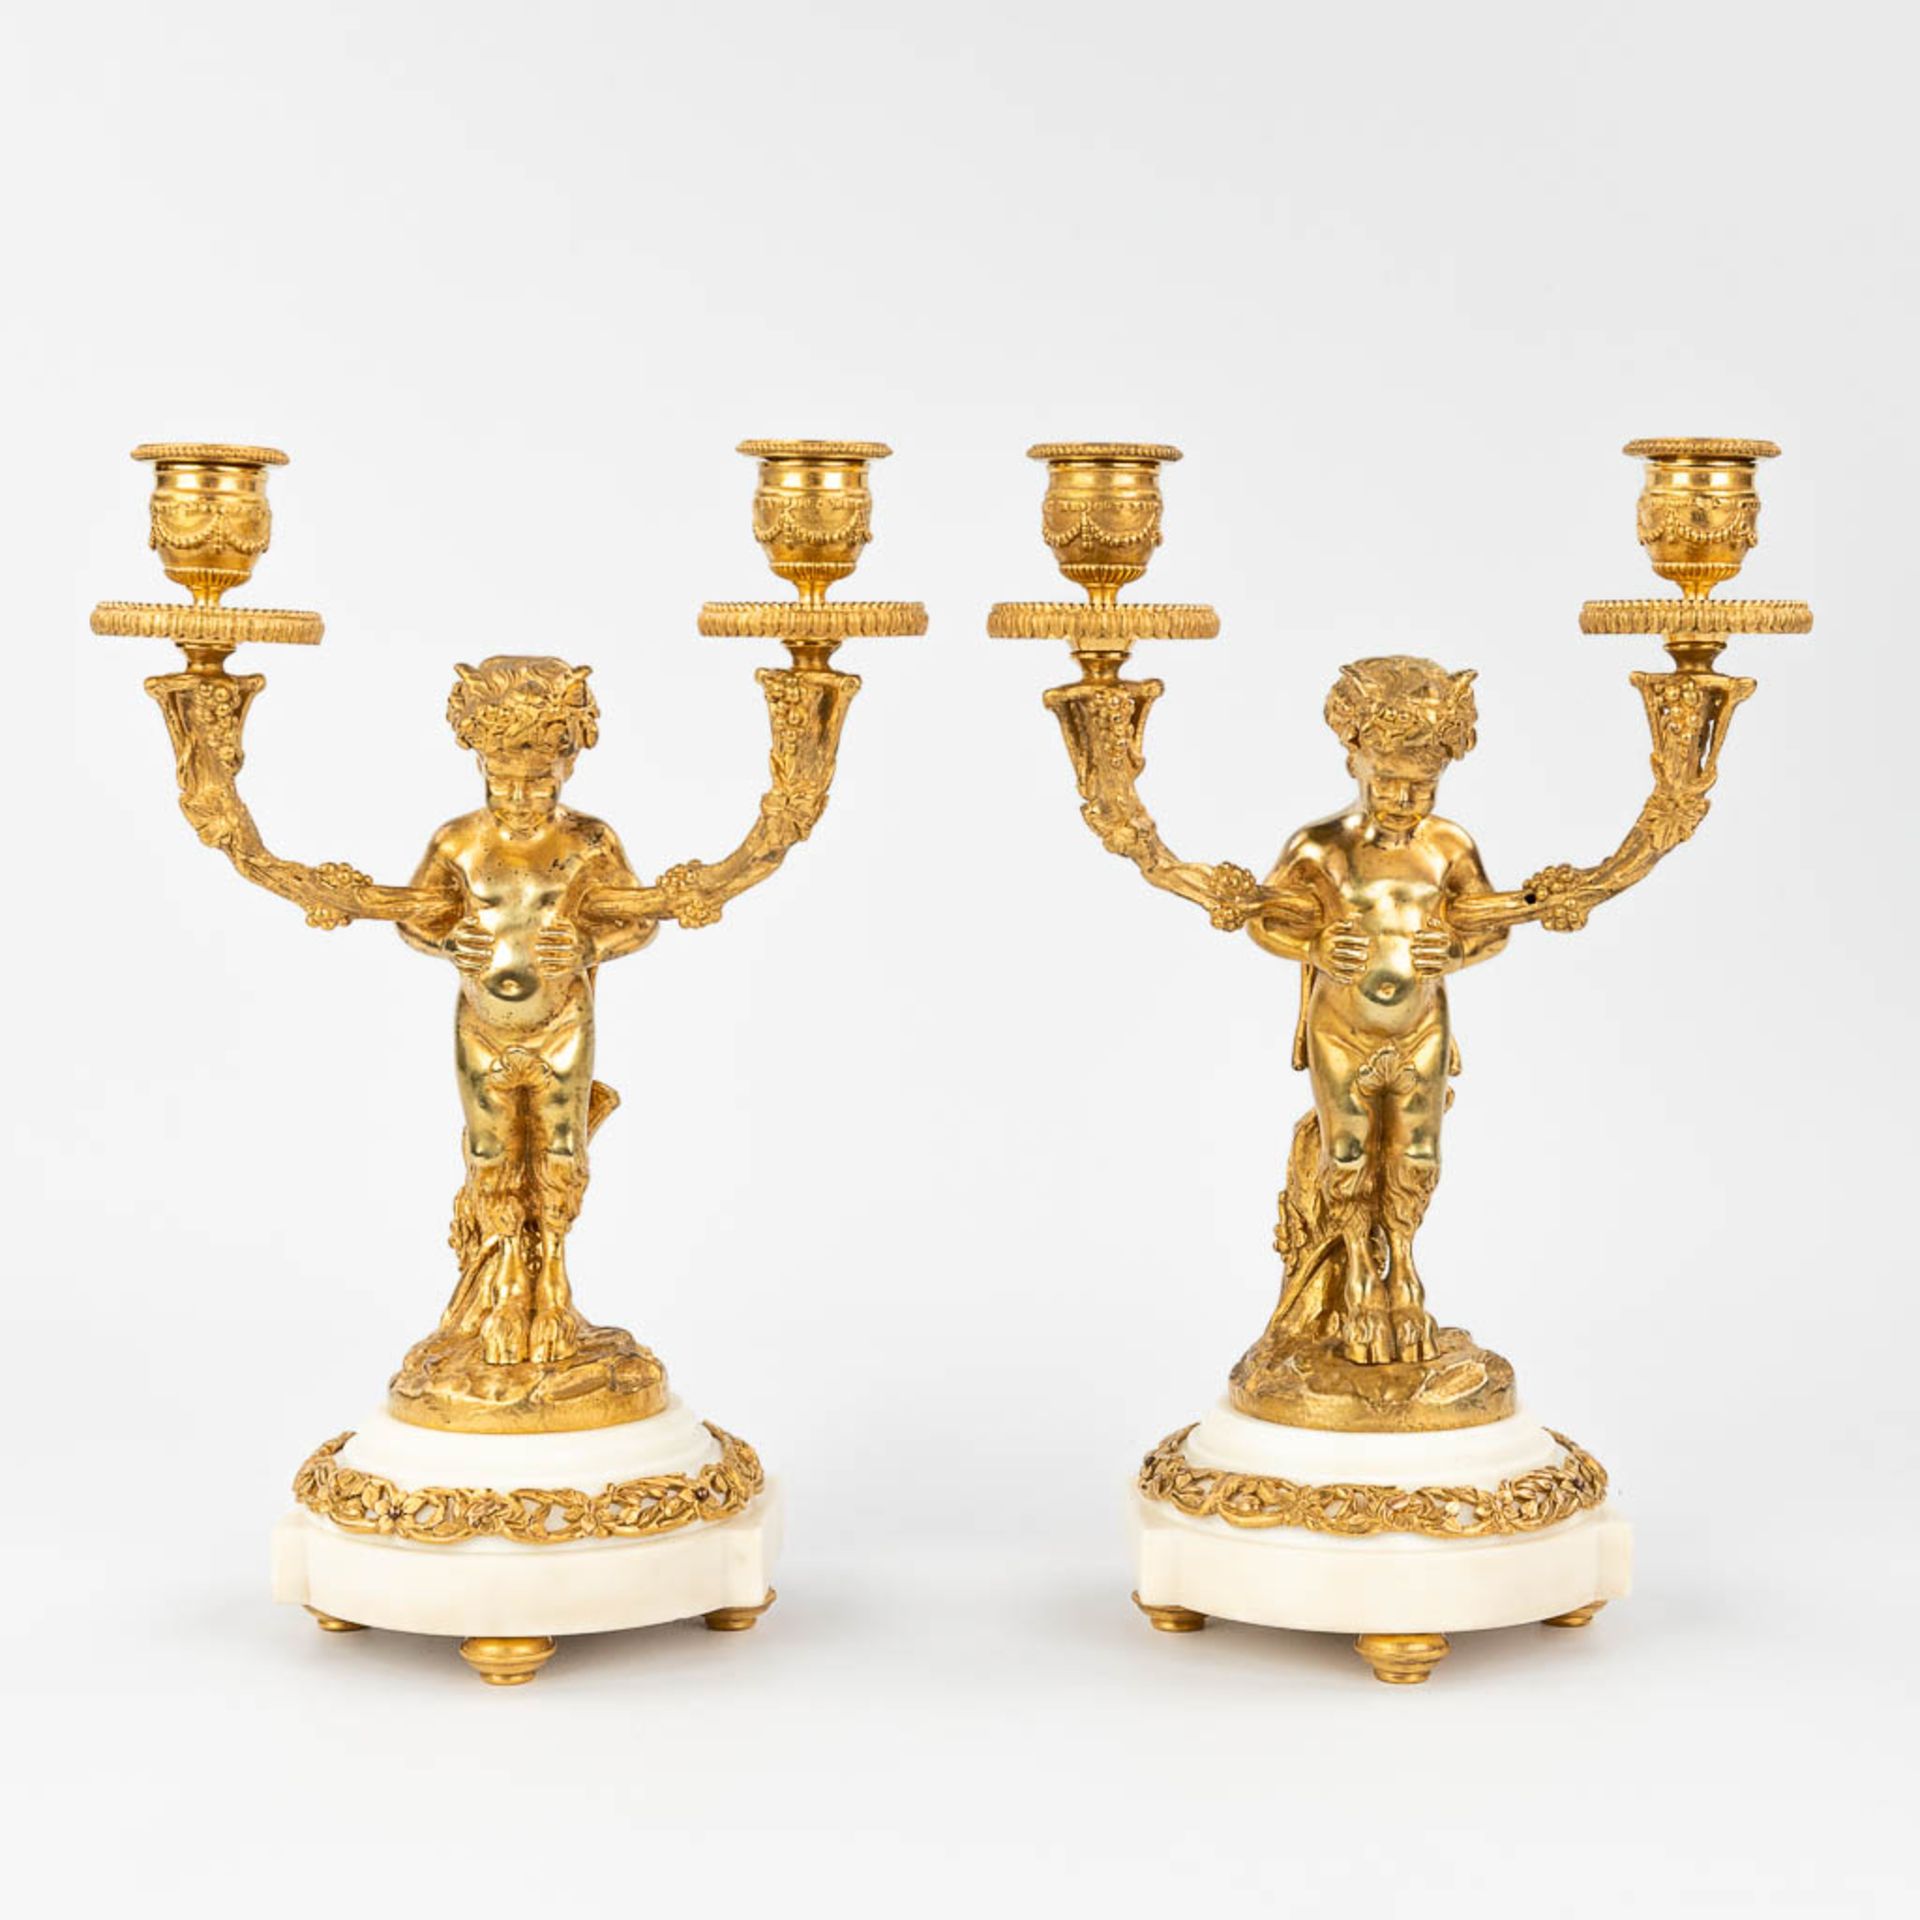 A pair of candelabra with Satyr figurines, made of gold-plated bronze. (13 x 21 x 30,5cm)